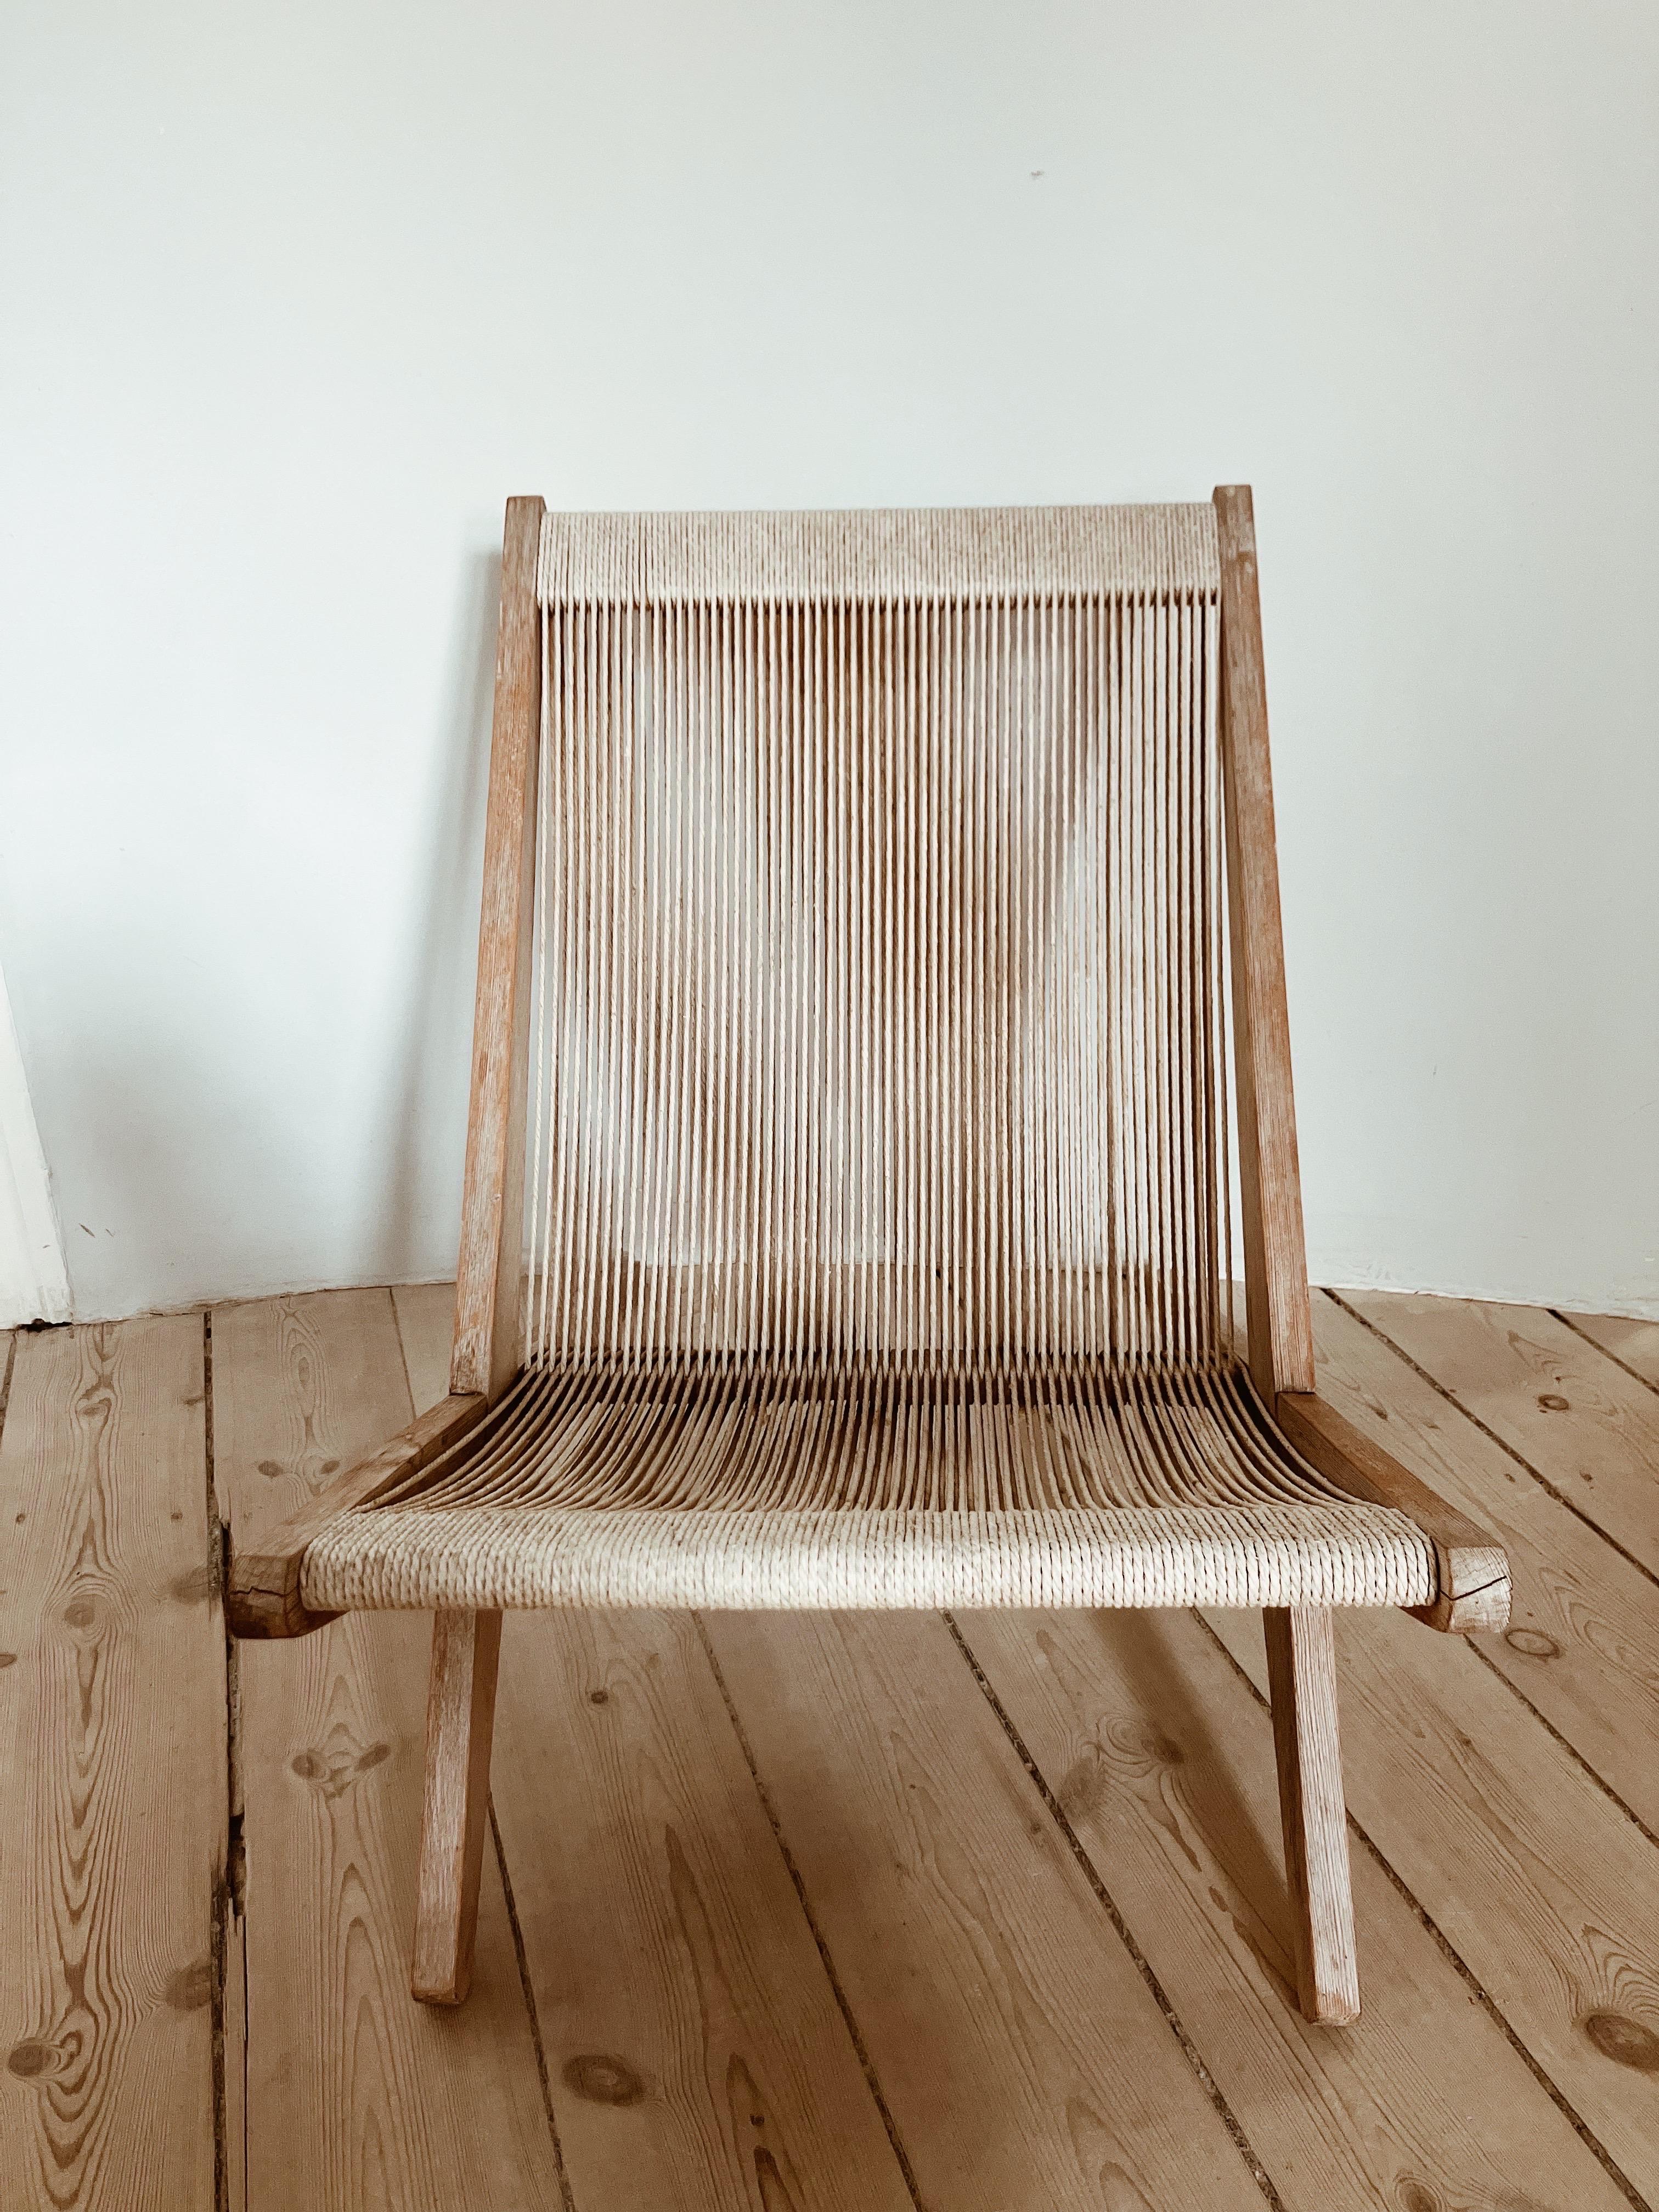 Danish lounge chair in pinewood and papercord, made in the style of Poul Kjærholm & Jørgen Høj (1952) 

This sculptural chair is probably made in the 70’s and the elegant pine wood frame and papercord is in a good condition. The chair is stable. 

